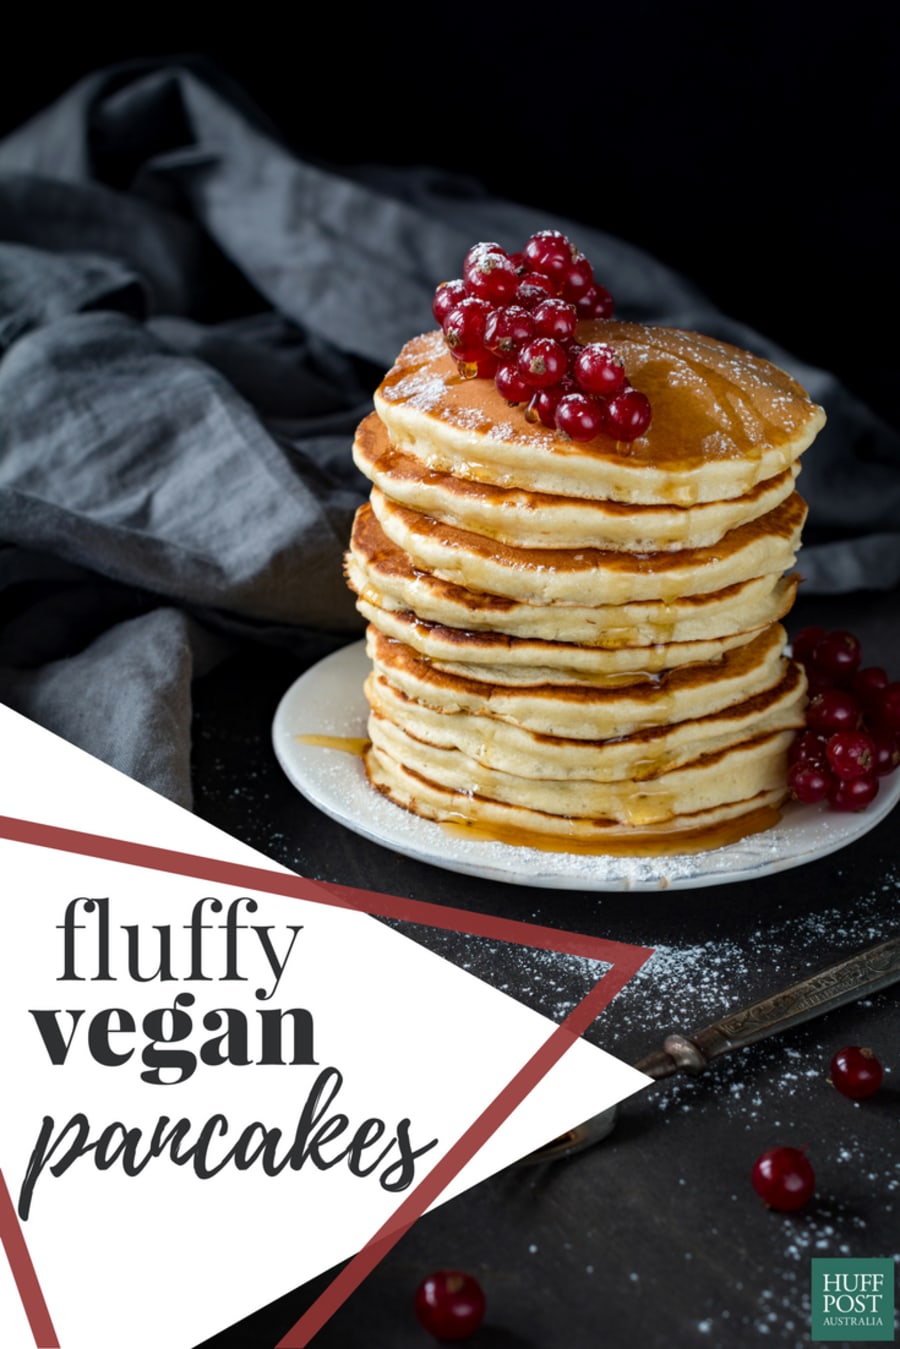 This Is How To Make Perfectly Fluffy Vegan Pancakes | HuffPost Australia